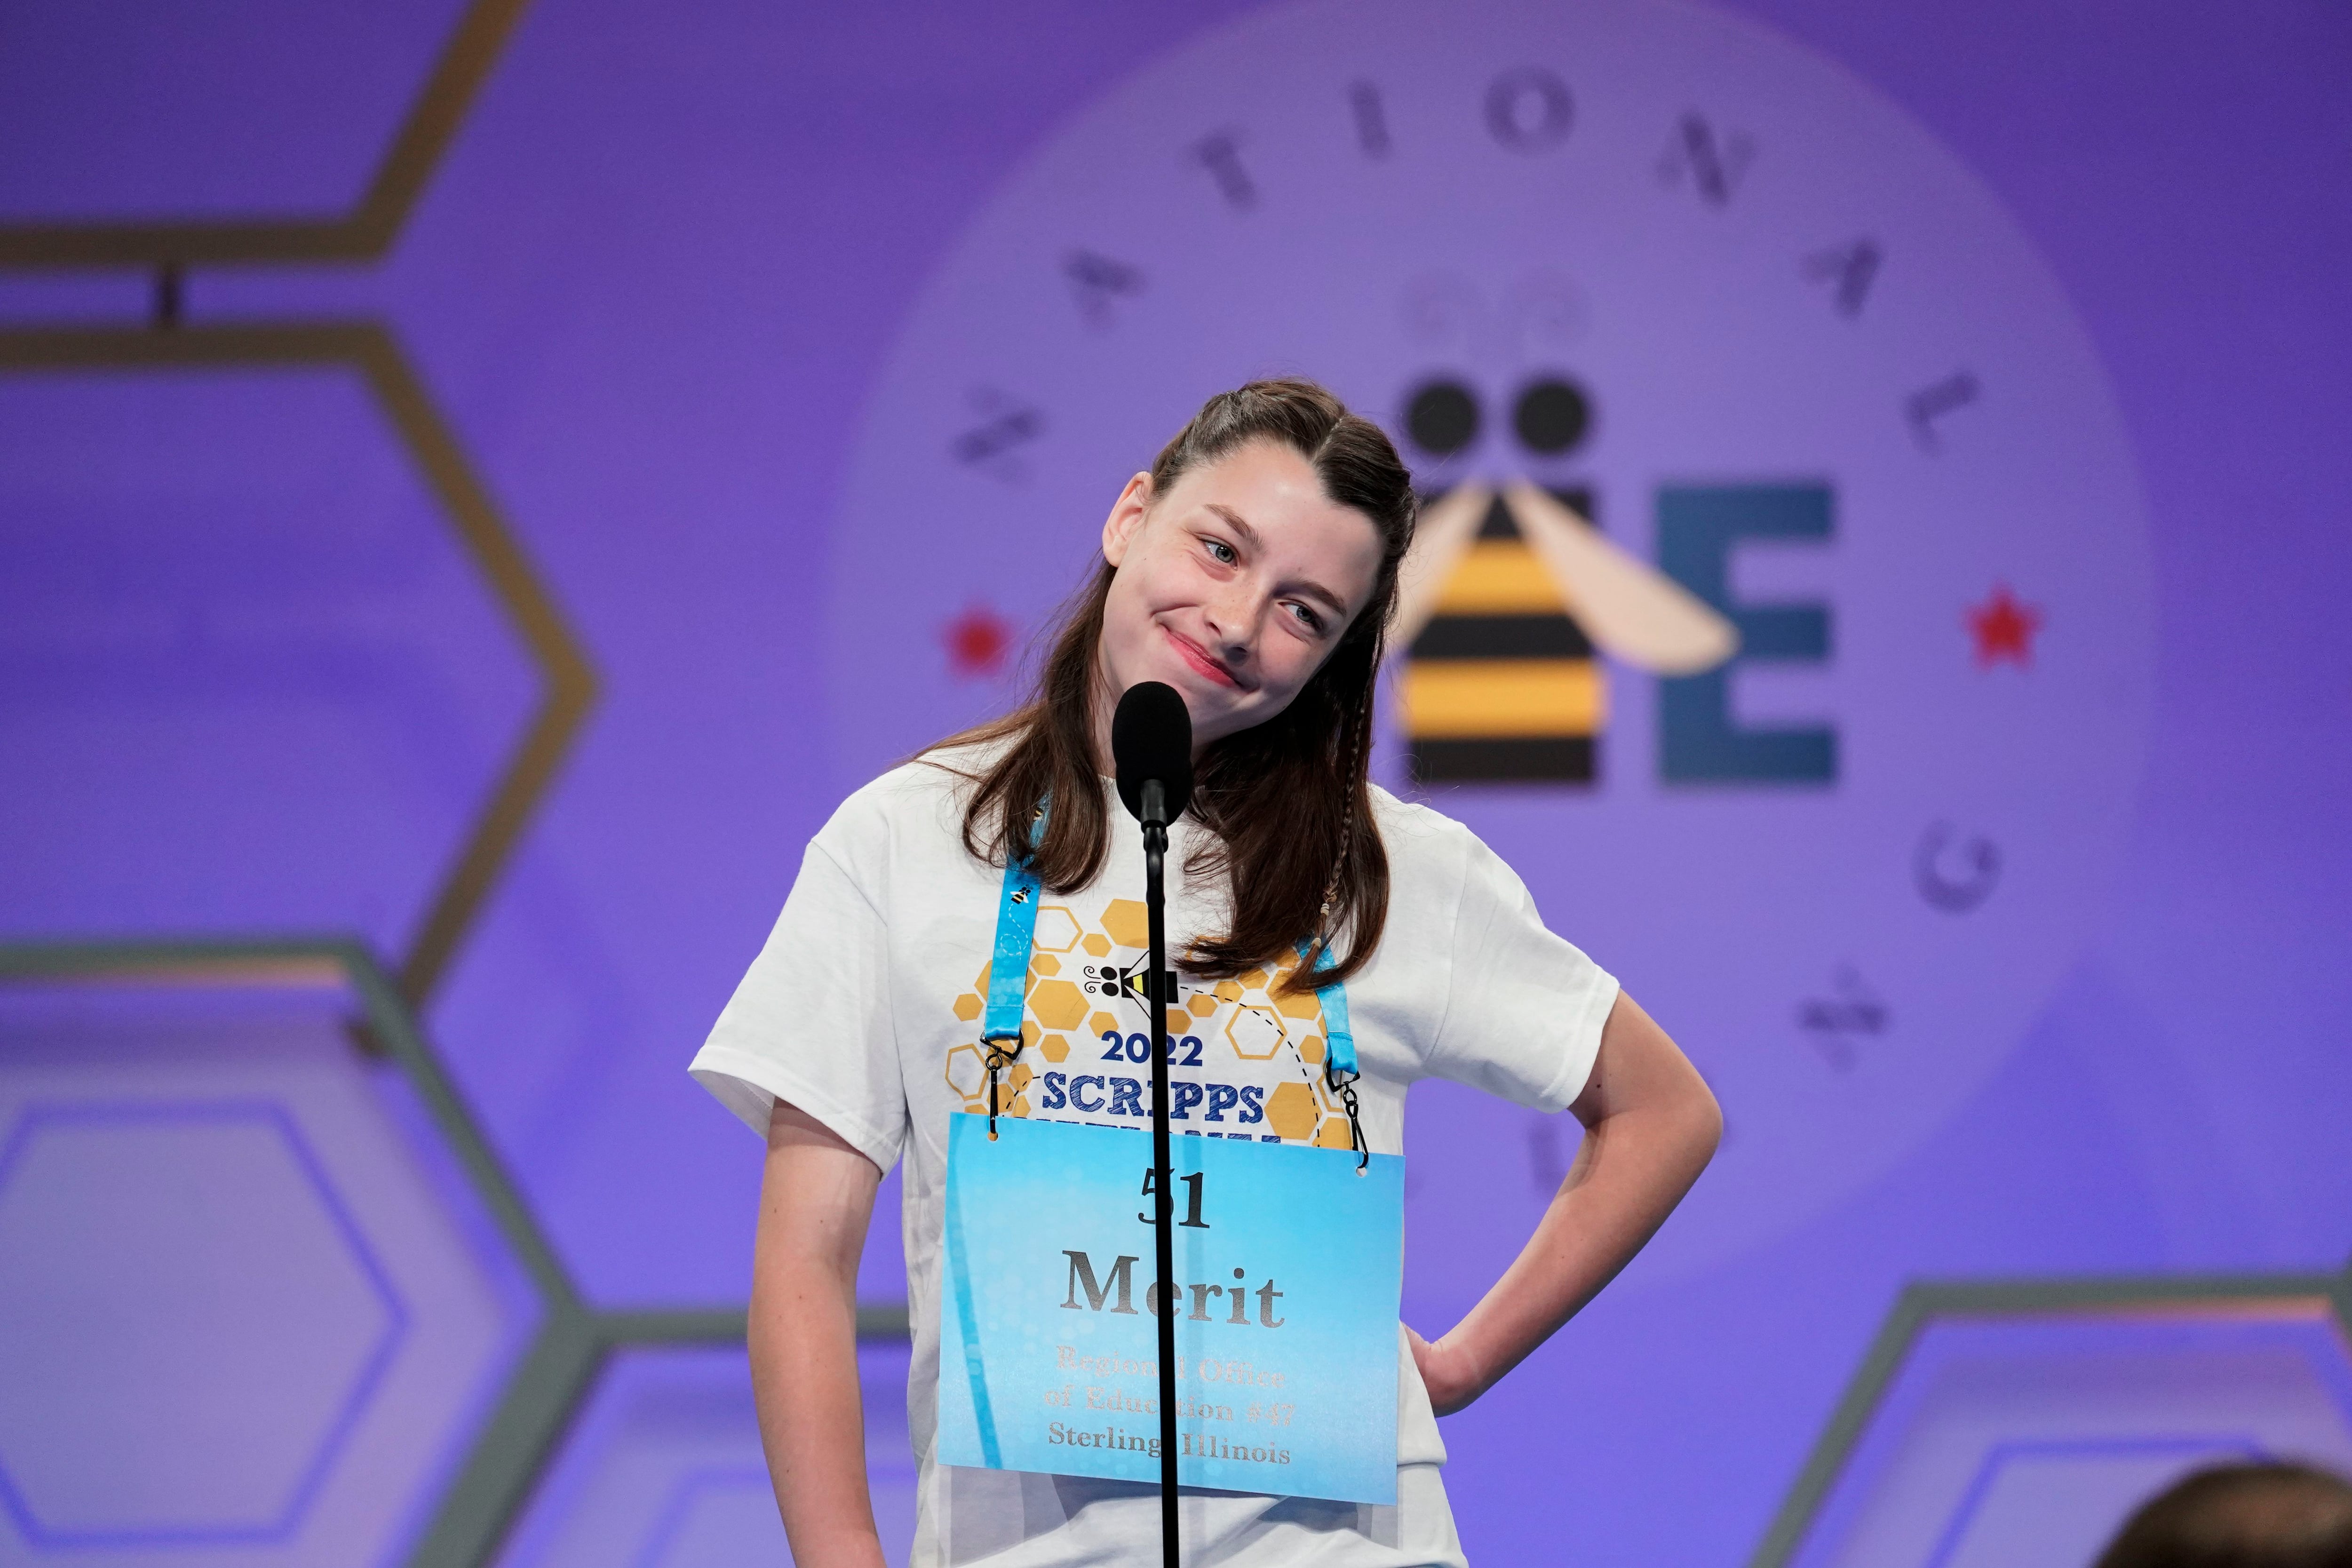 Initial rounds of National Spelling Bee get tough